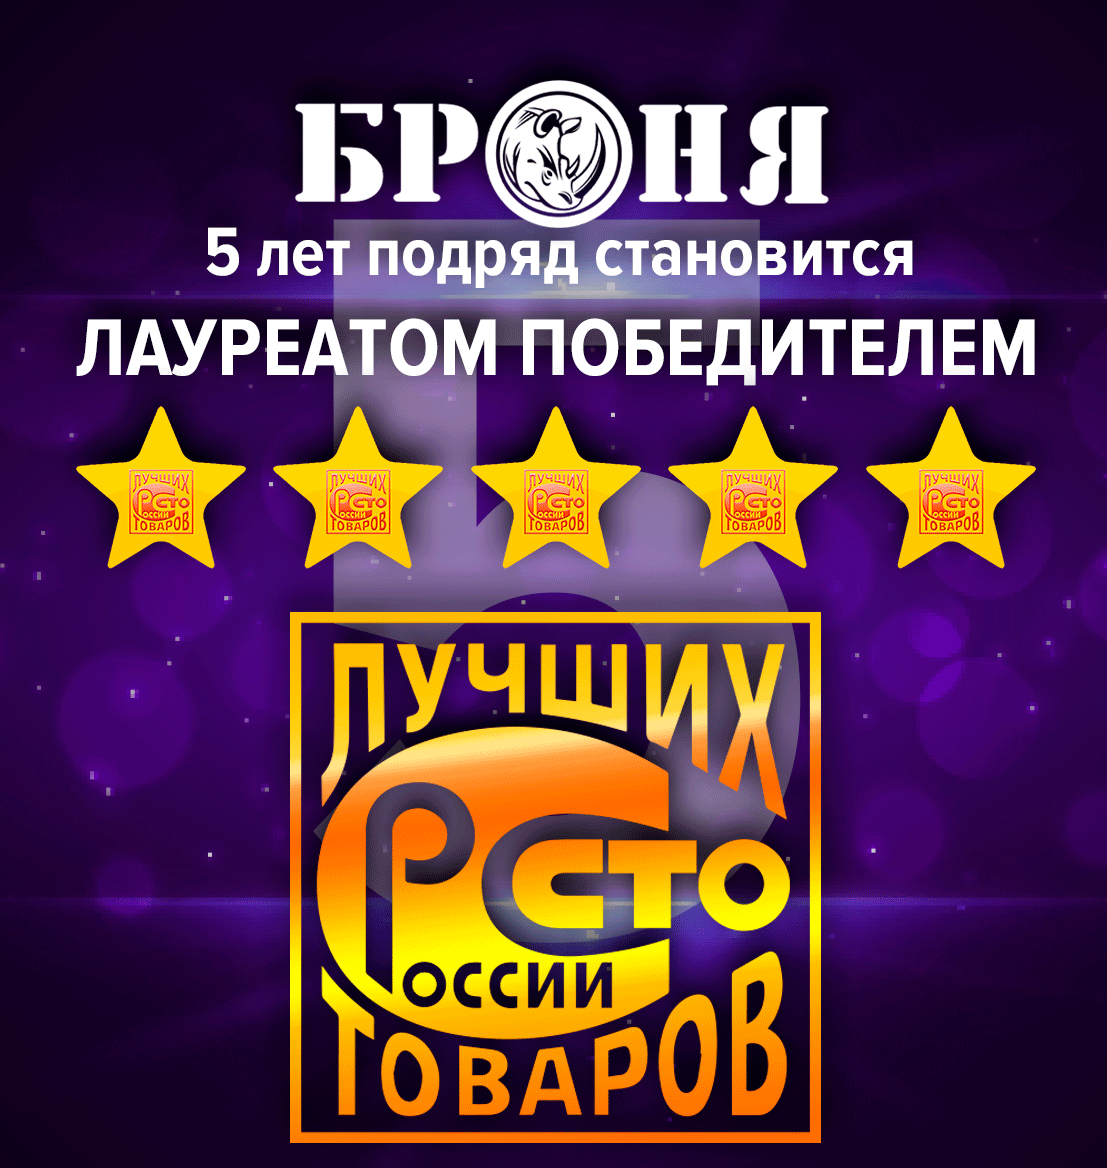 Announcement of the news about the victory of Bronya in the "100 Best products of Russia"